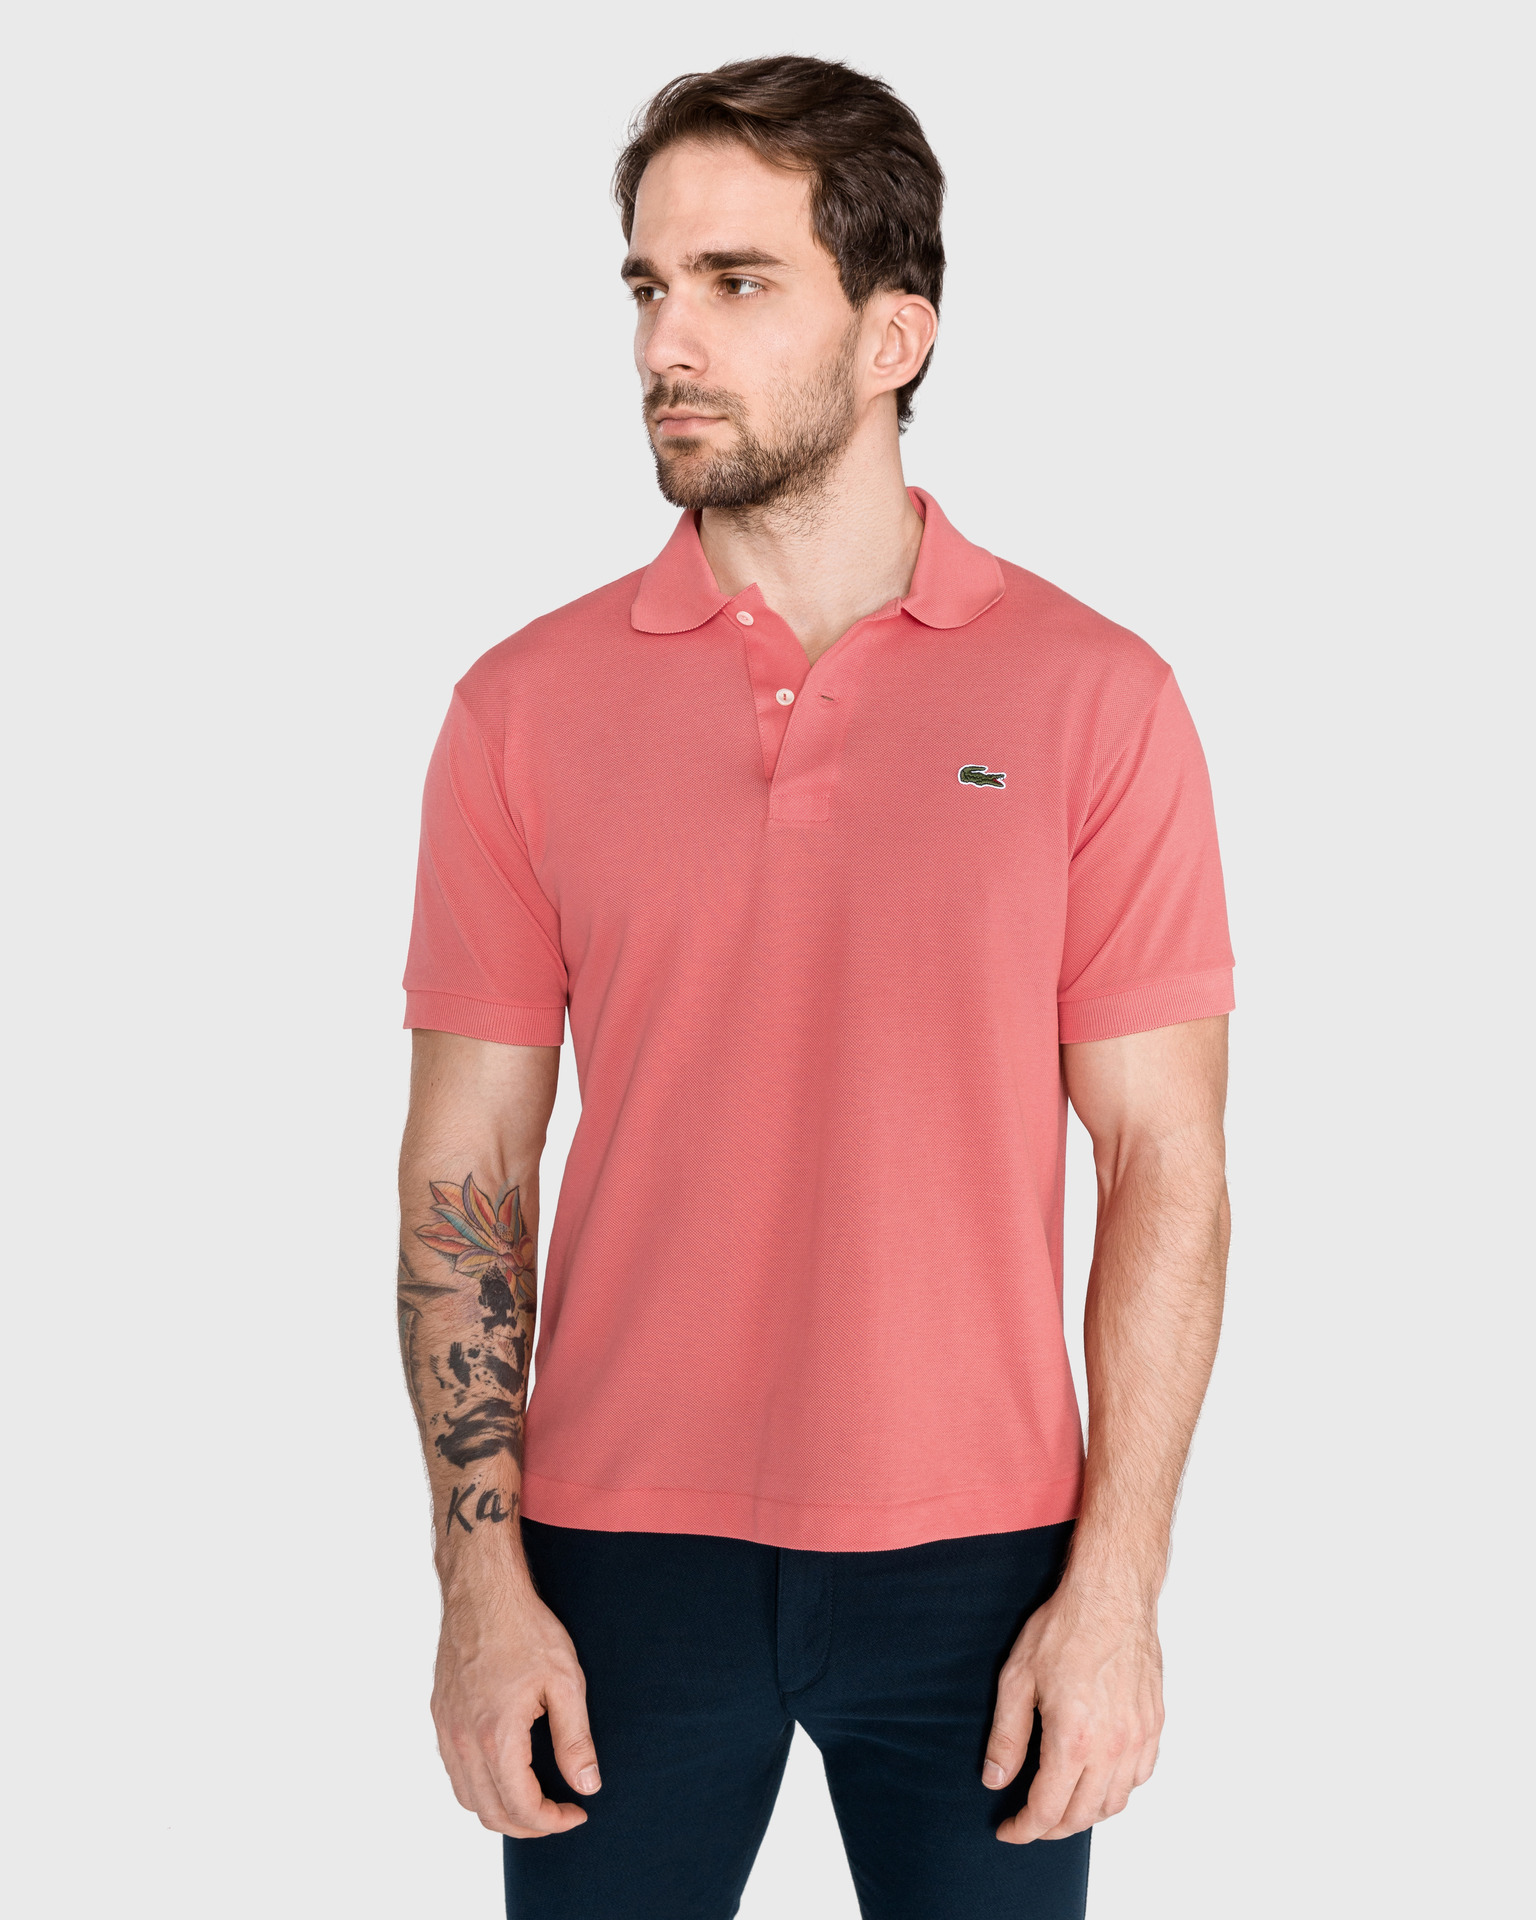 pink polo shirt lacoste